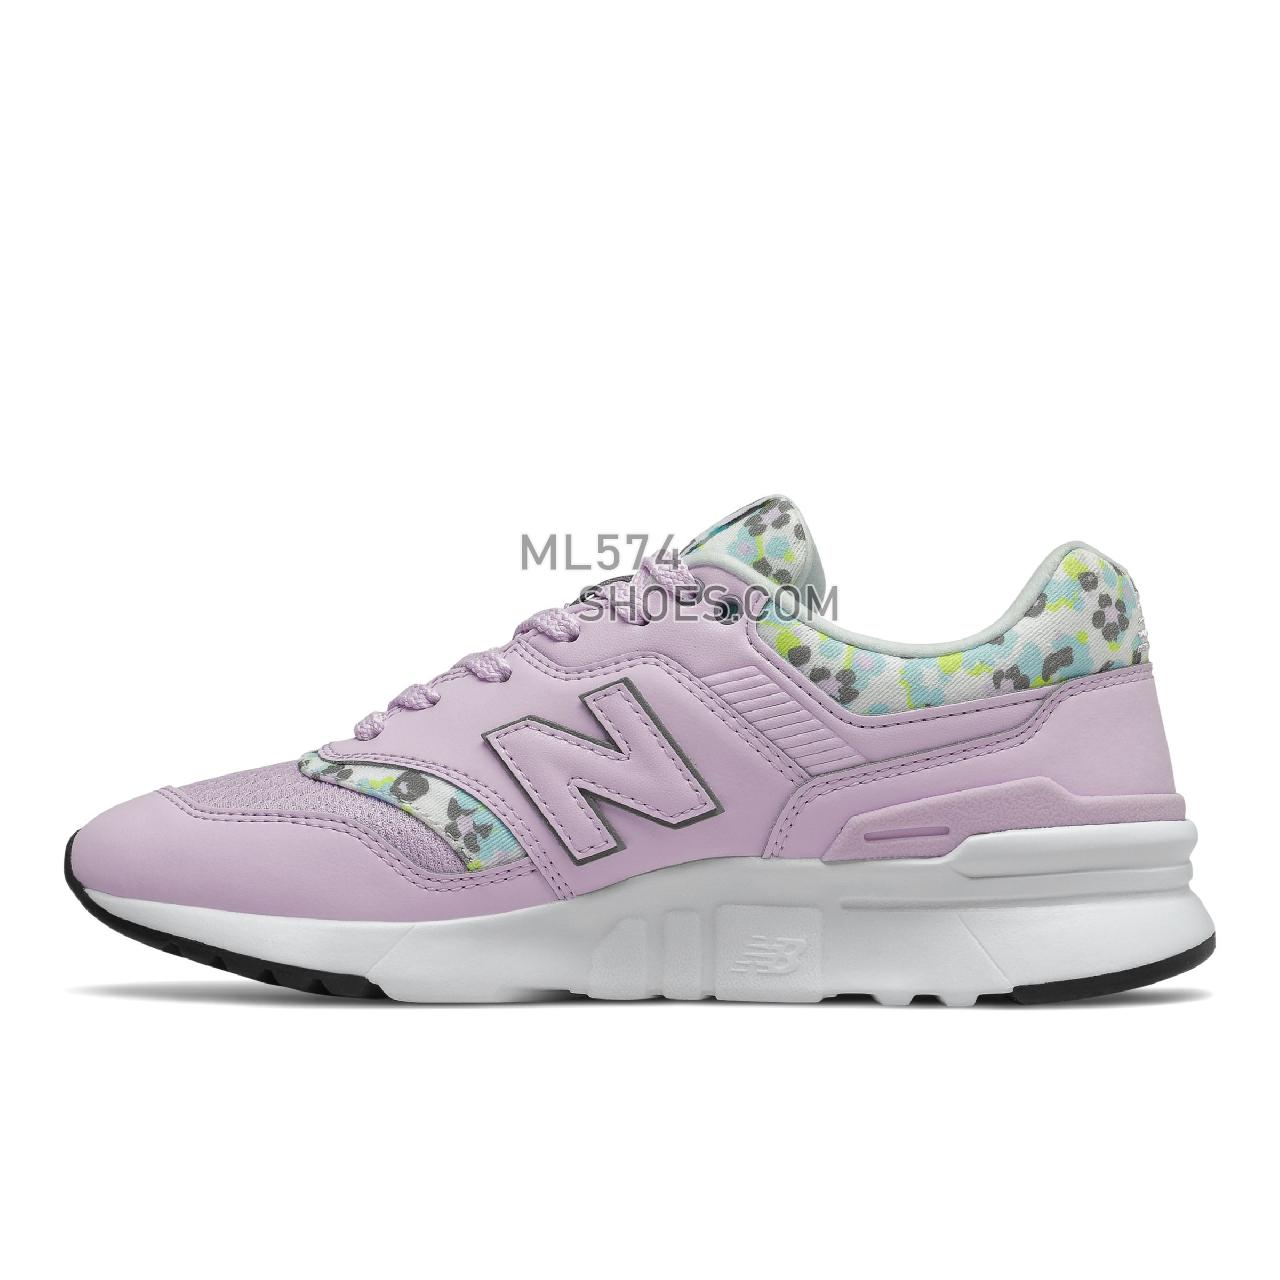 New Balance 997H - Women's Classic Sneakers - Purple with White - CW997HGB